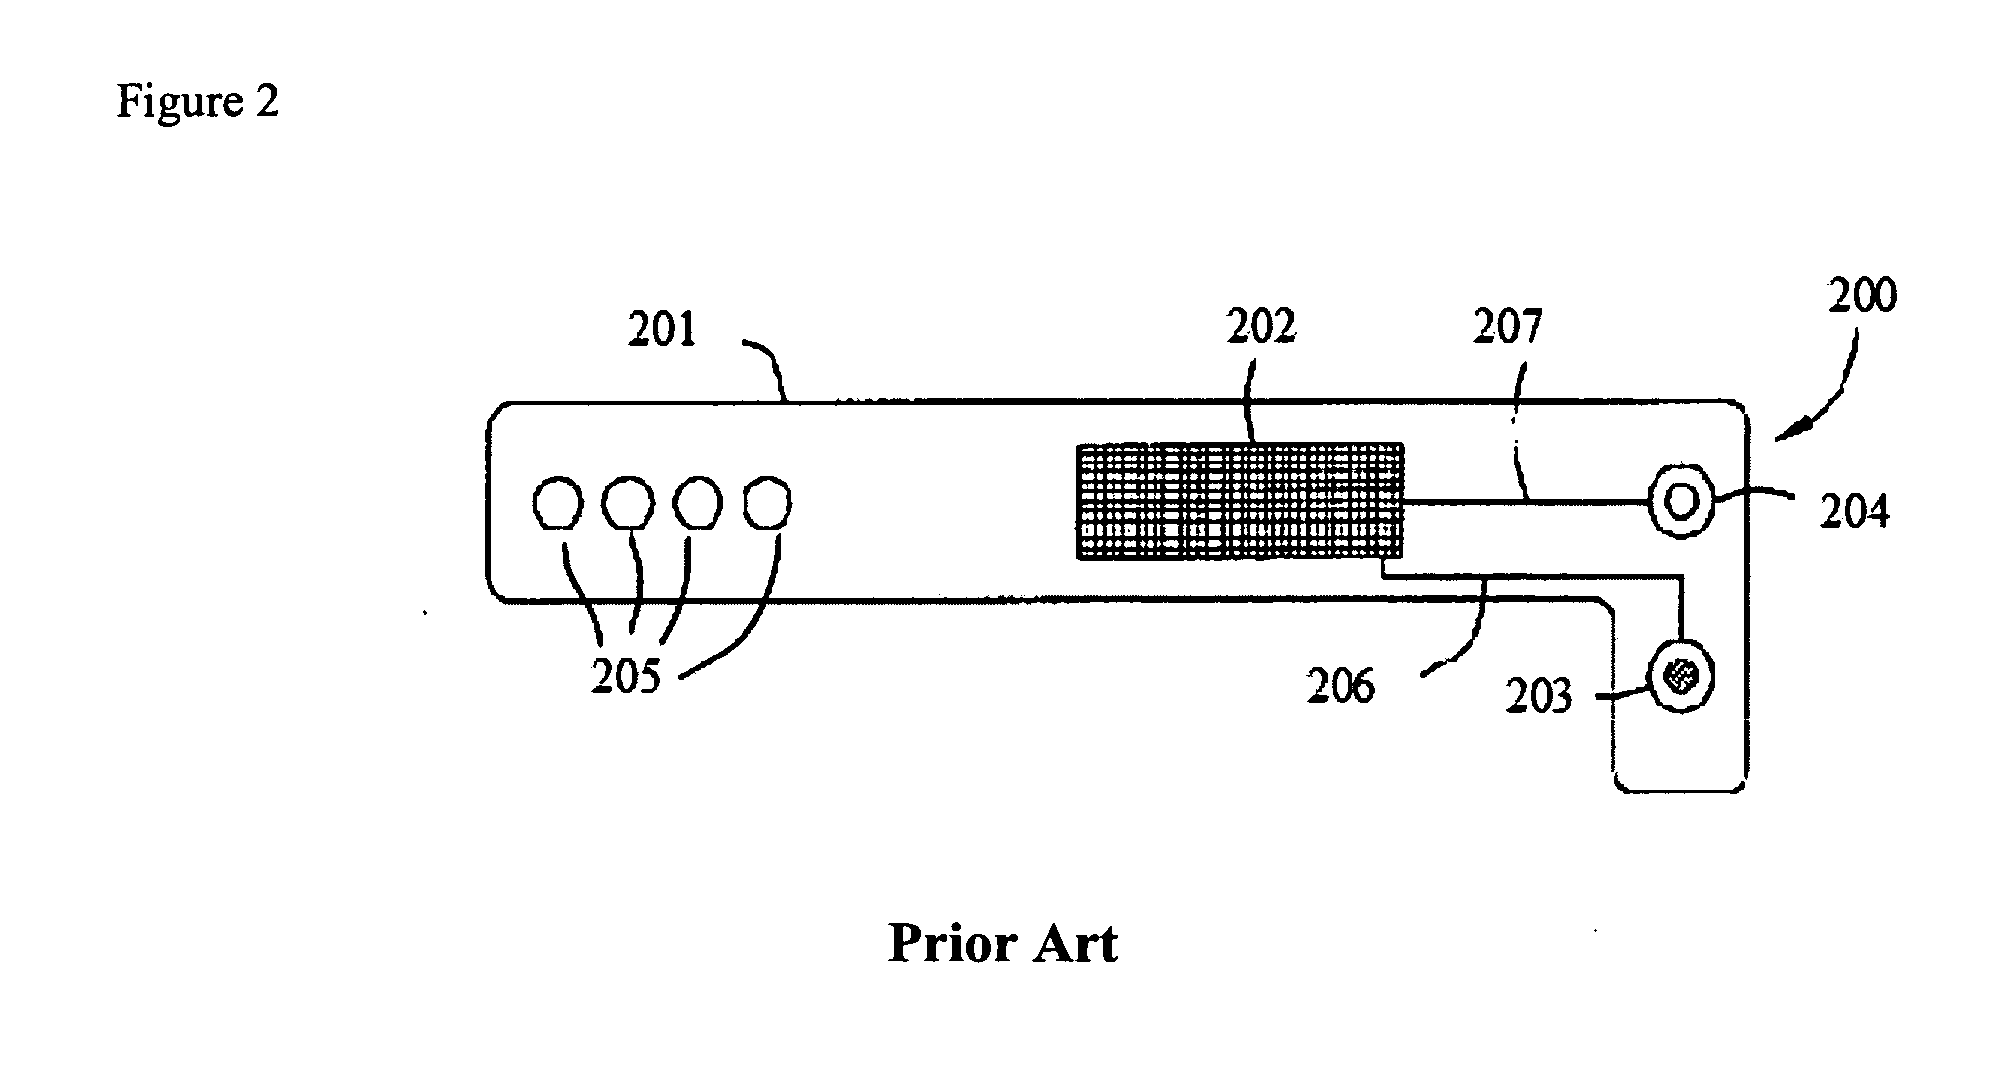 Identification band using a conductive fastening for enhanced security and functionality